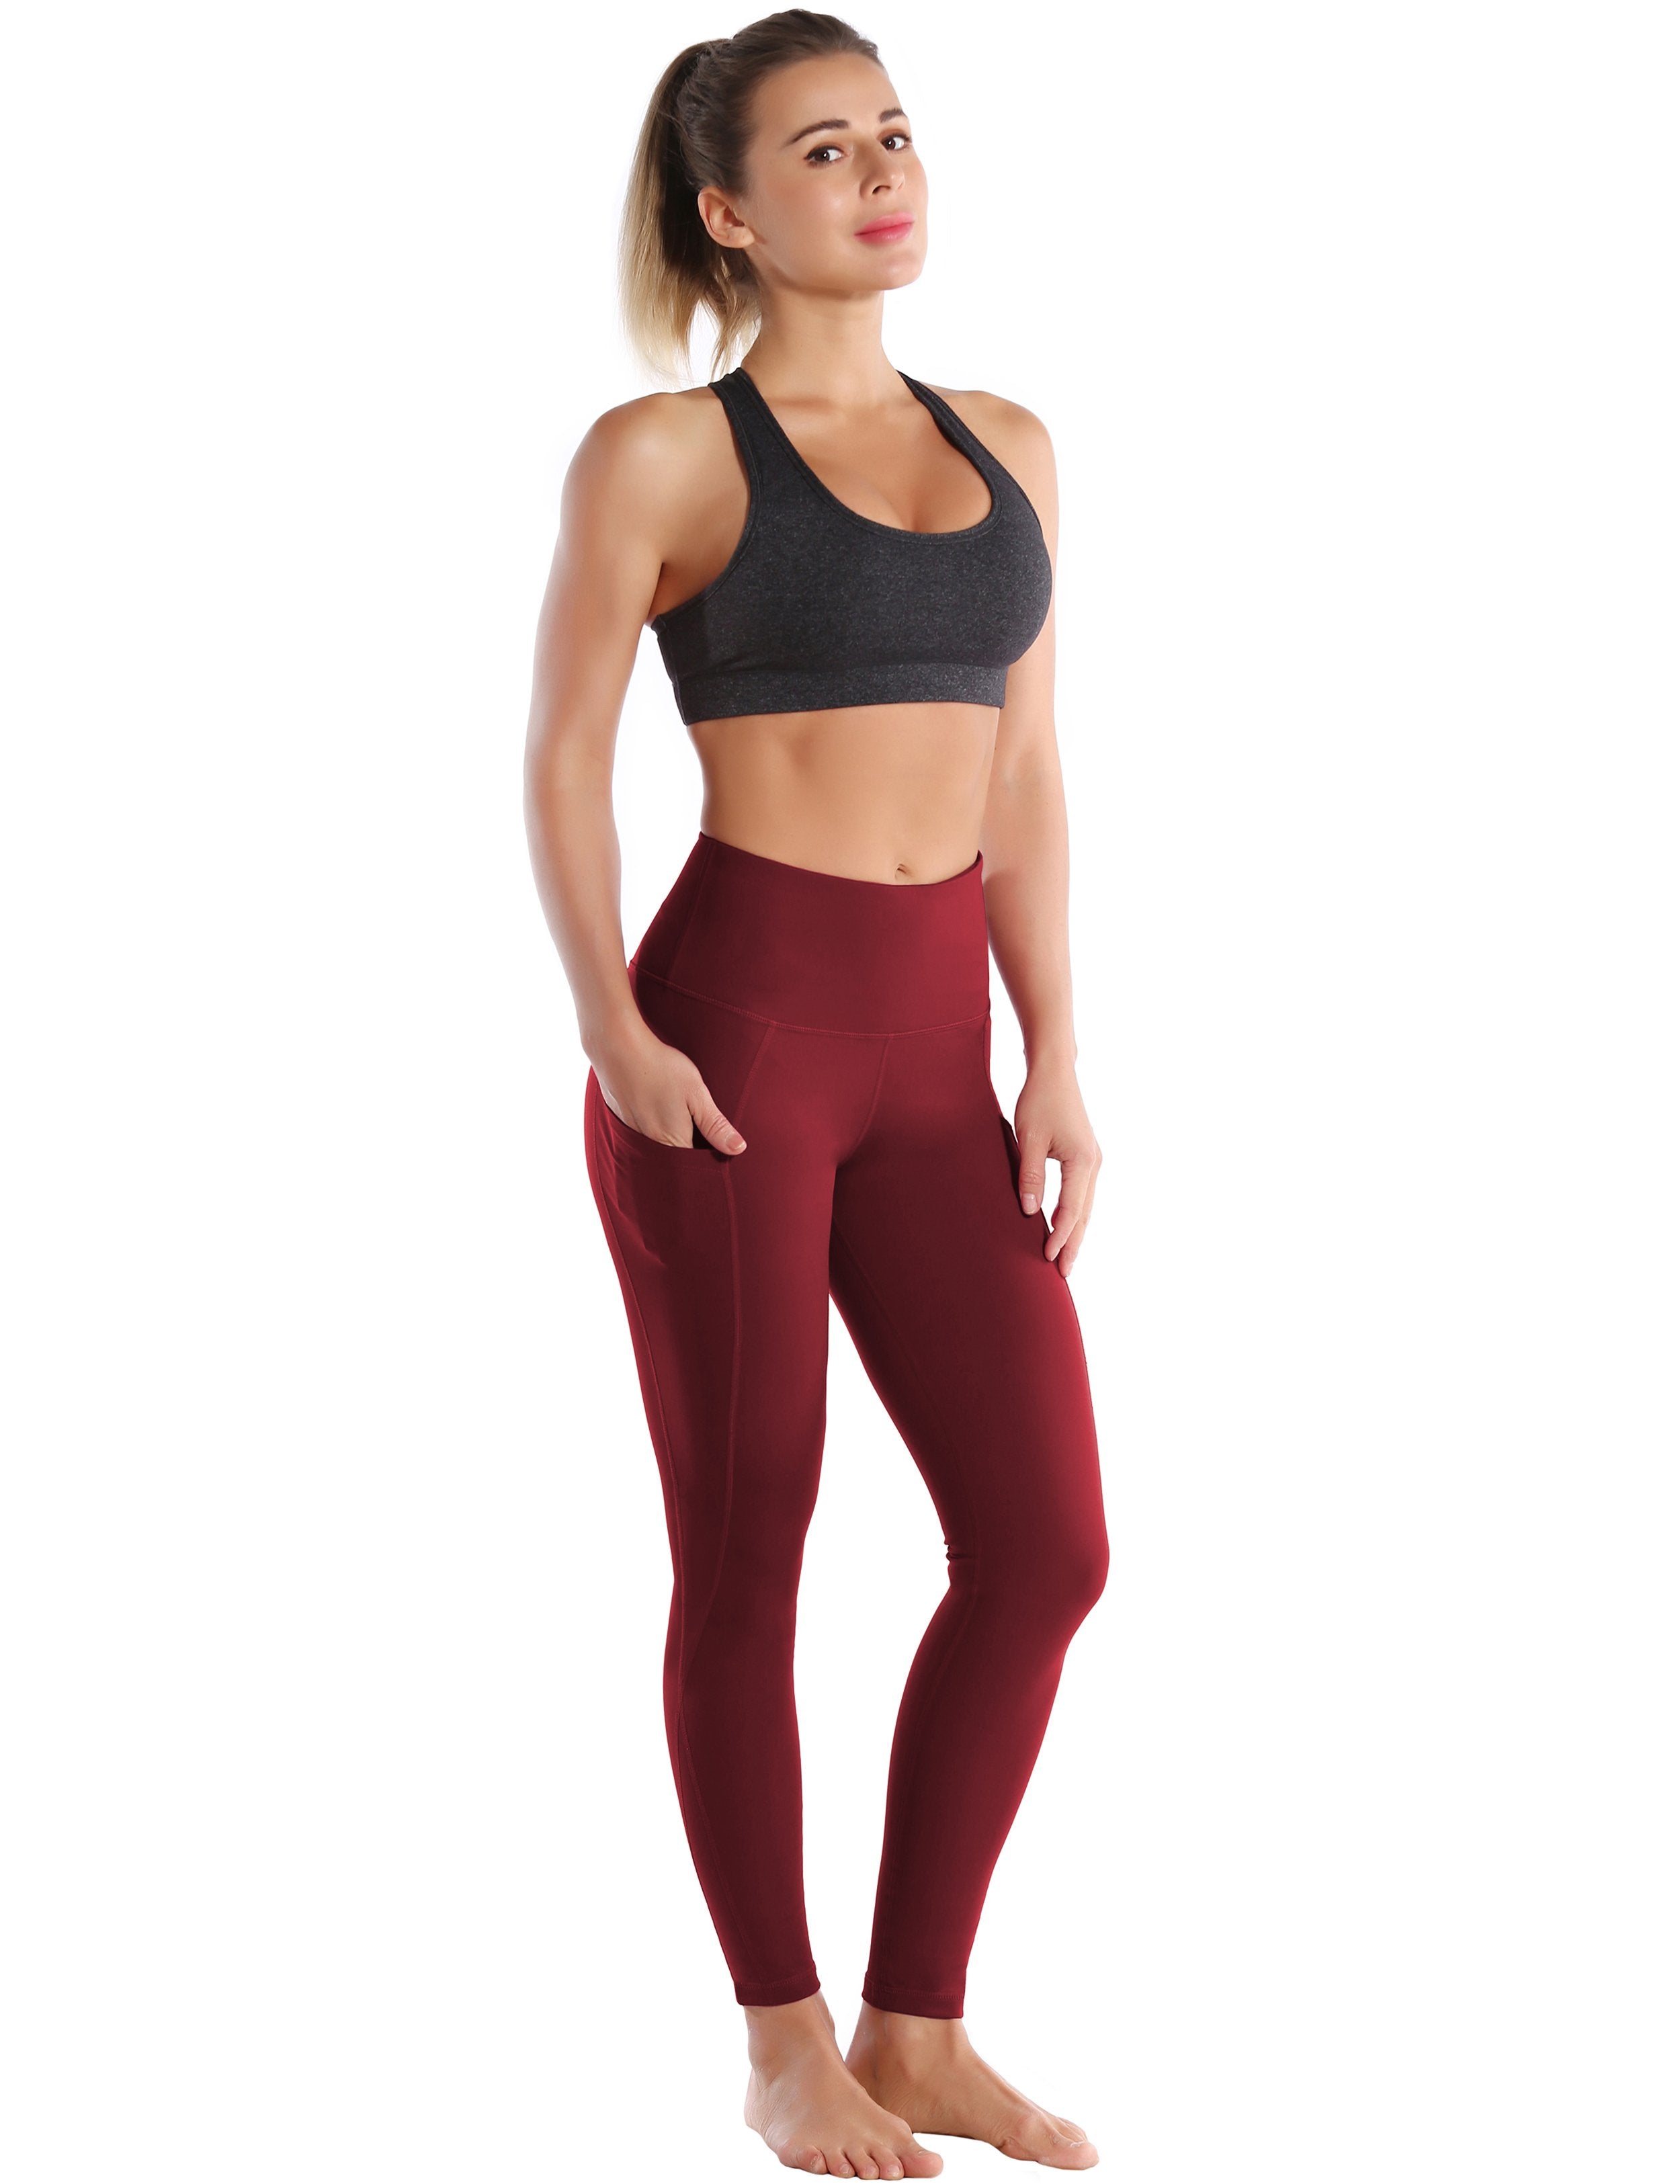 High Waist Side Pockets Yoga Pants cherryred 75% Nylon, 25% Spandex Fabric doesn't attract lint easily 4-way stretch No see-through Moisture-wicking Tummy control Inner pocket